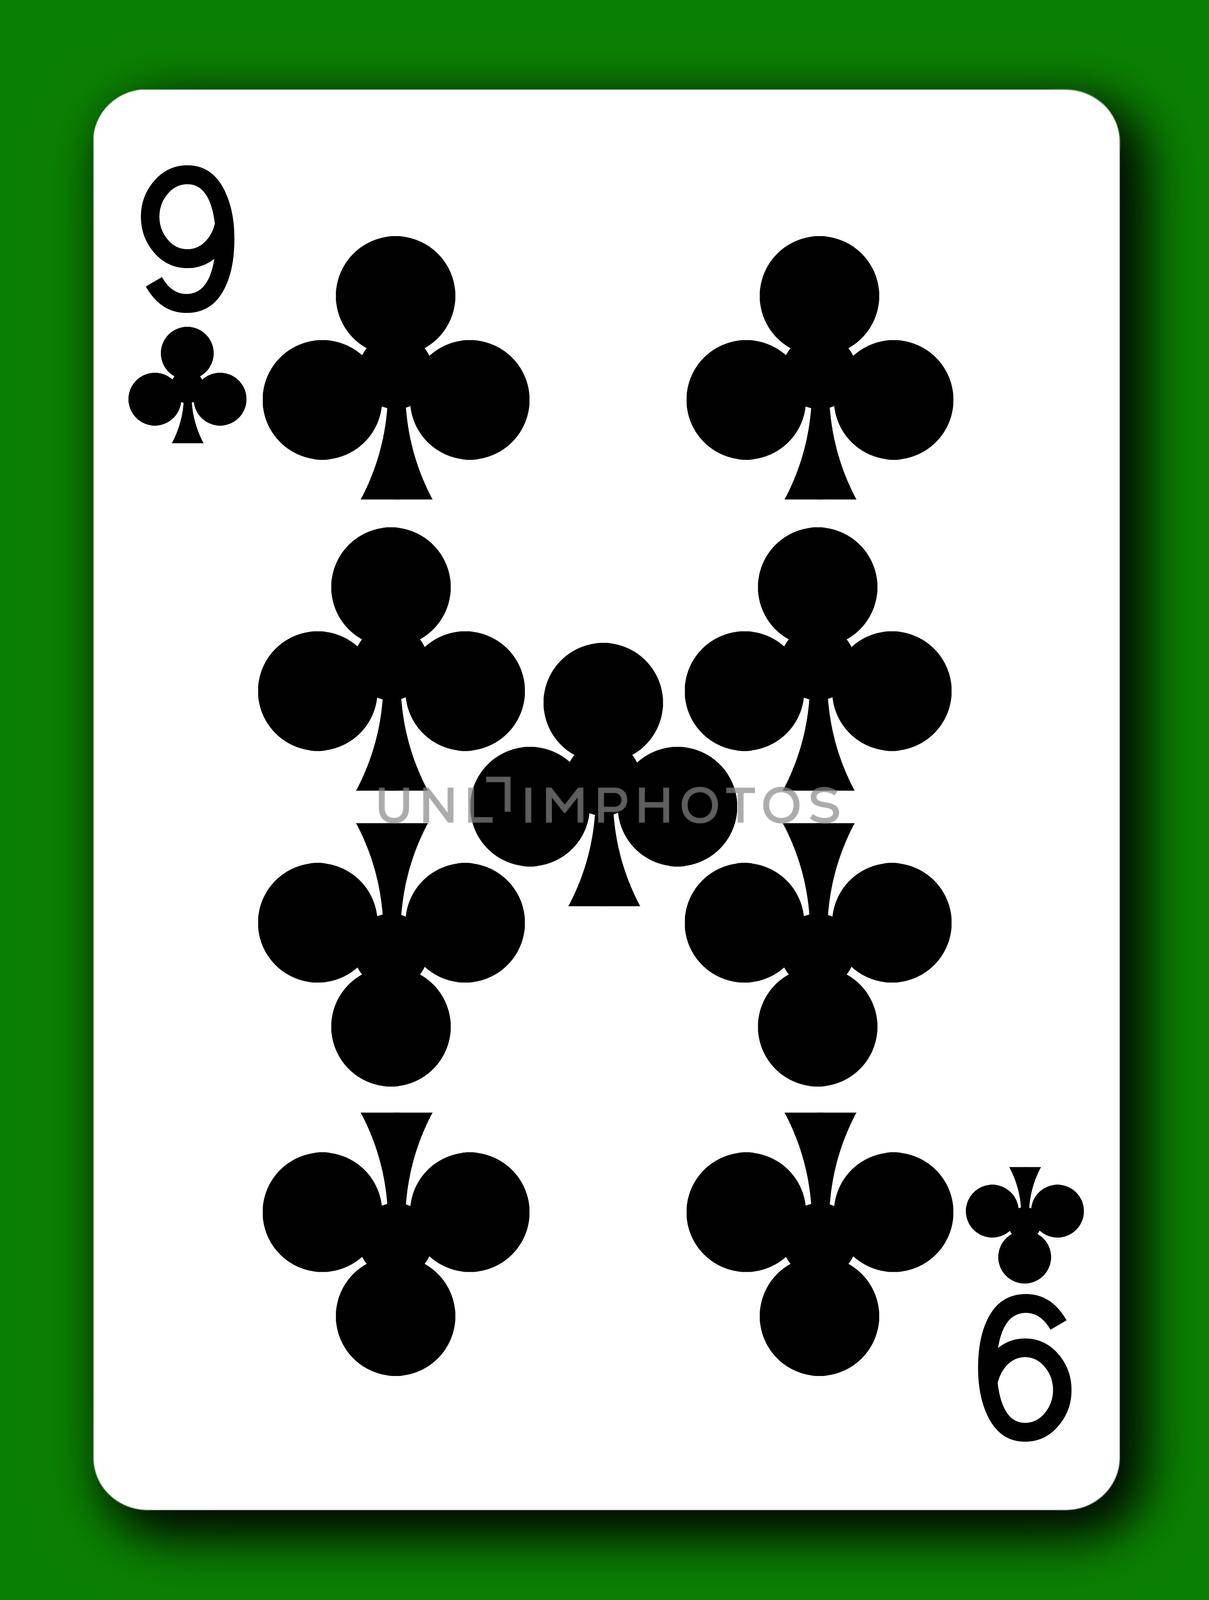 A 9 Nine of Clubs playing card with clipping path to remove background and shadow 3d illustration